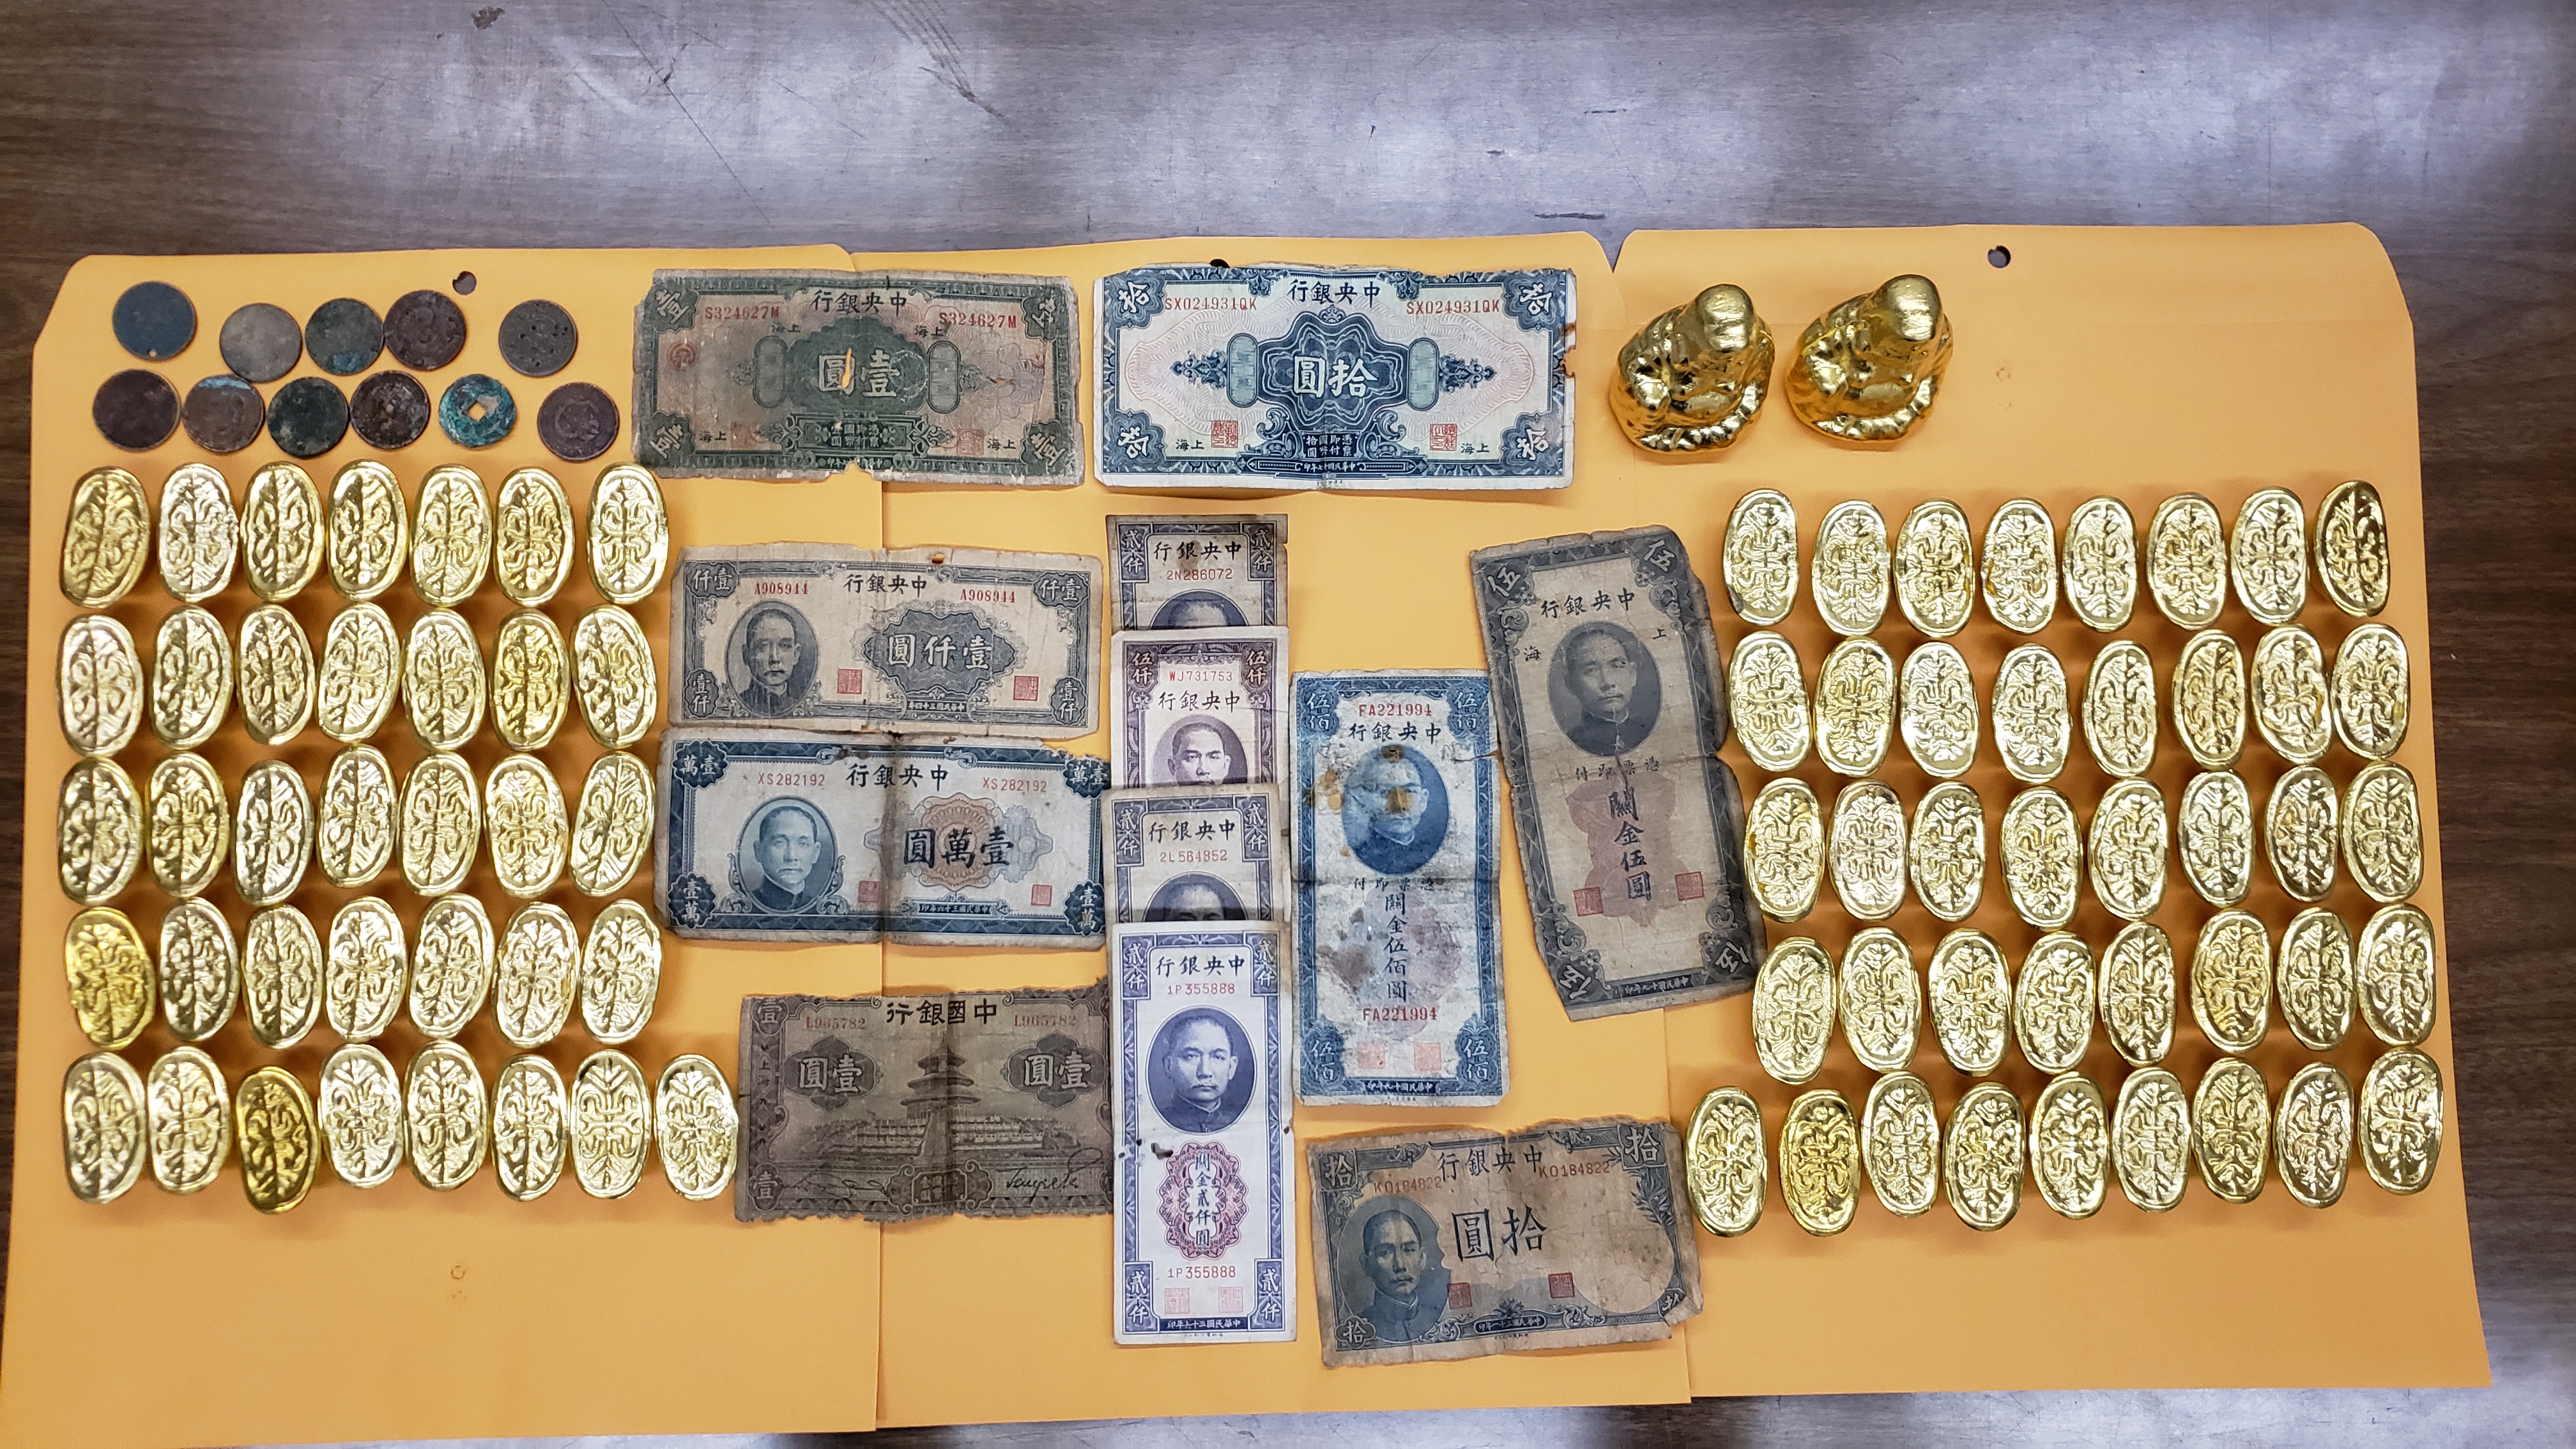 Photos of fake gold ingots, fake gold Buddha statues and Chinese currency